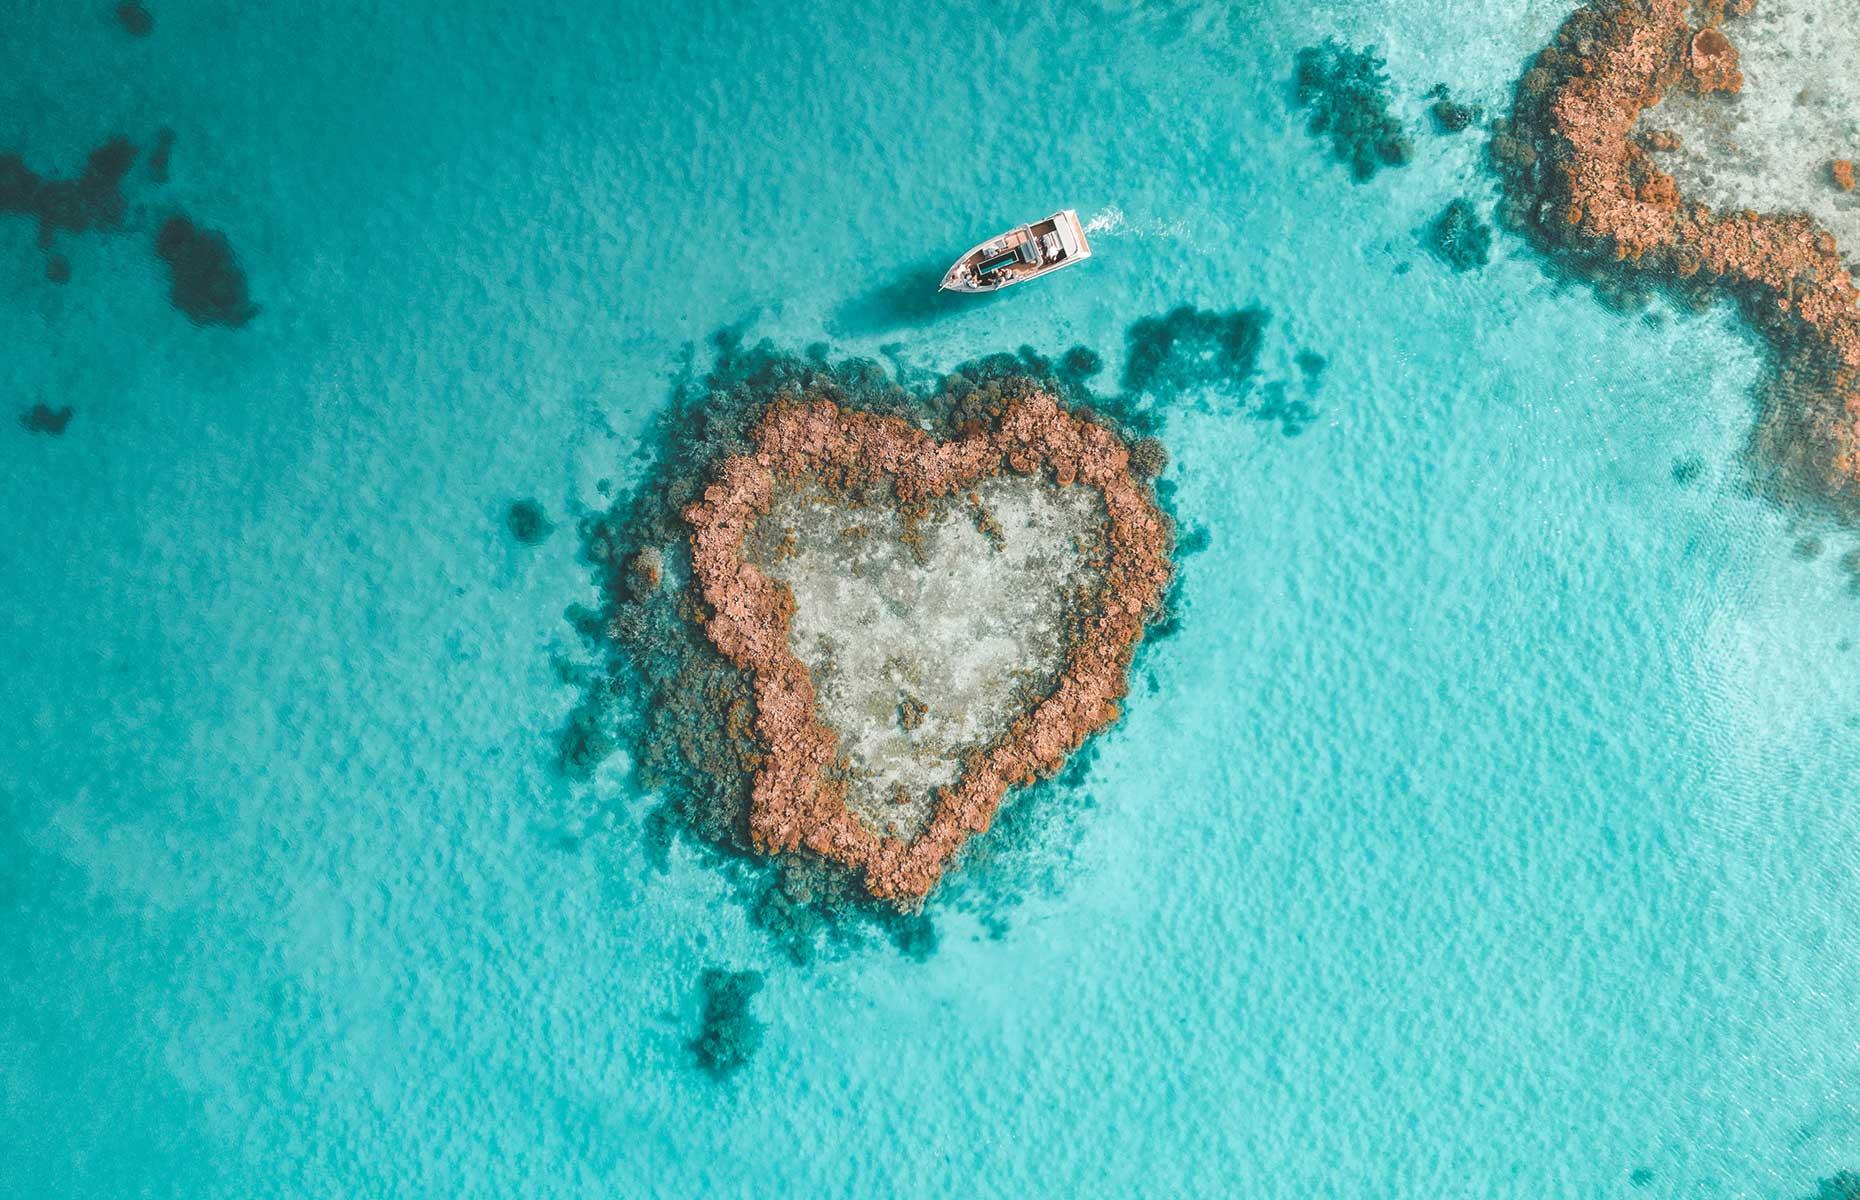 You might think you’re in the romantic Maldives or on a stunning Greek island, but Heart Reef is one of the most mesmerizing places in Australia. This tropical archipelago is a coral naturally formed in the shape of a heart and is only accessible by helicopter, seaplane or light plane tour, adding to its secluded charm. Board a glass-bottomed boat to watch the turtles and colorful fish glide through the turquoise waters.